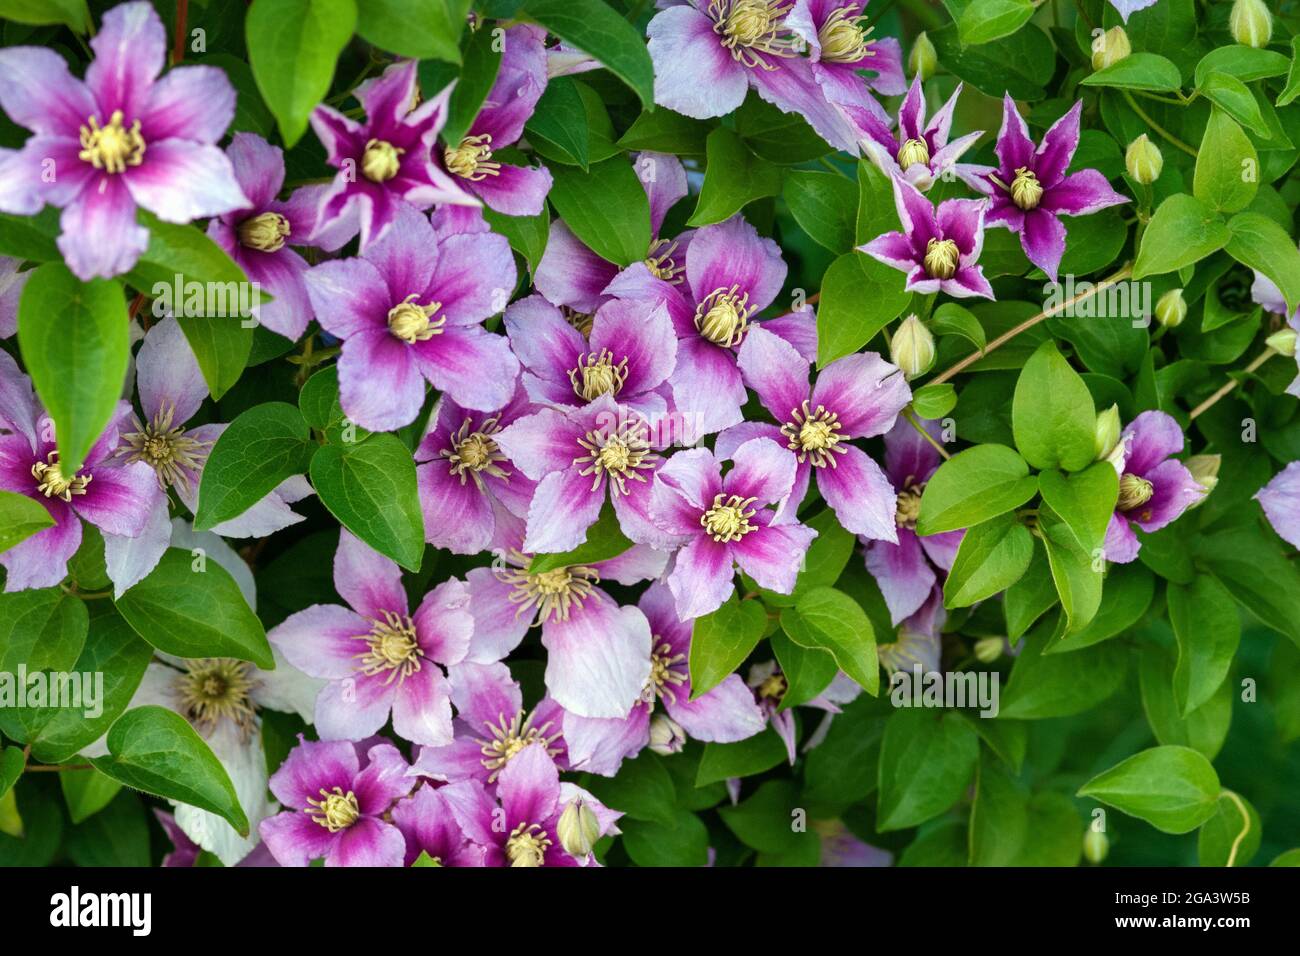 Clematis pink purple flowers on green leaves background Stock Photo